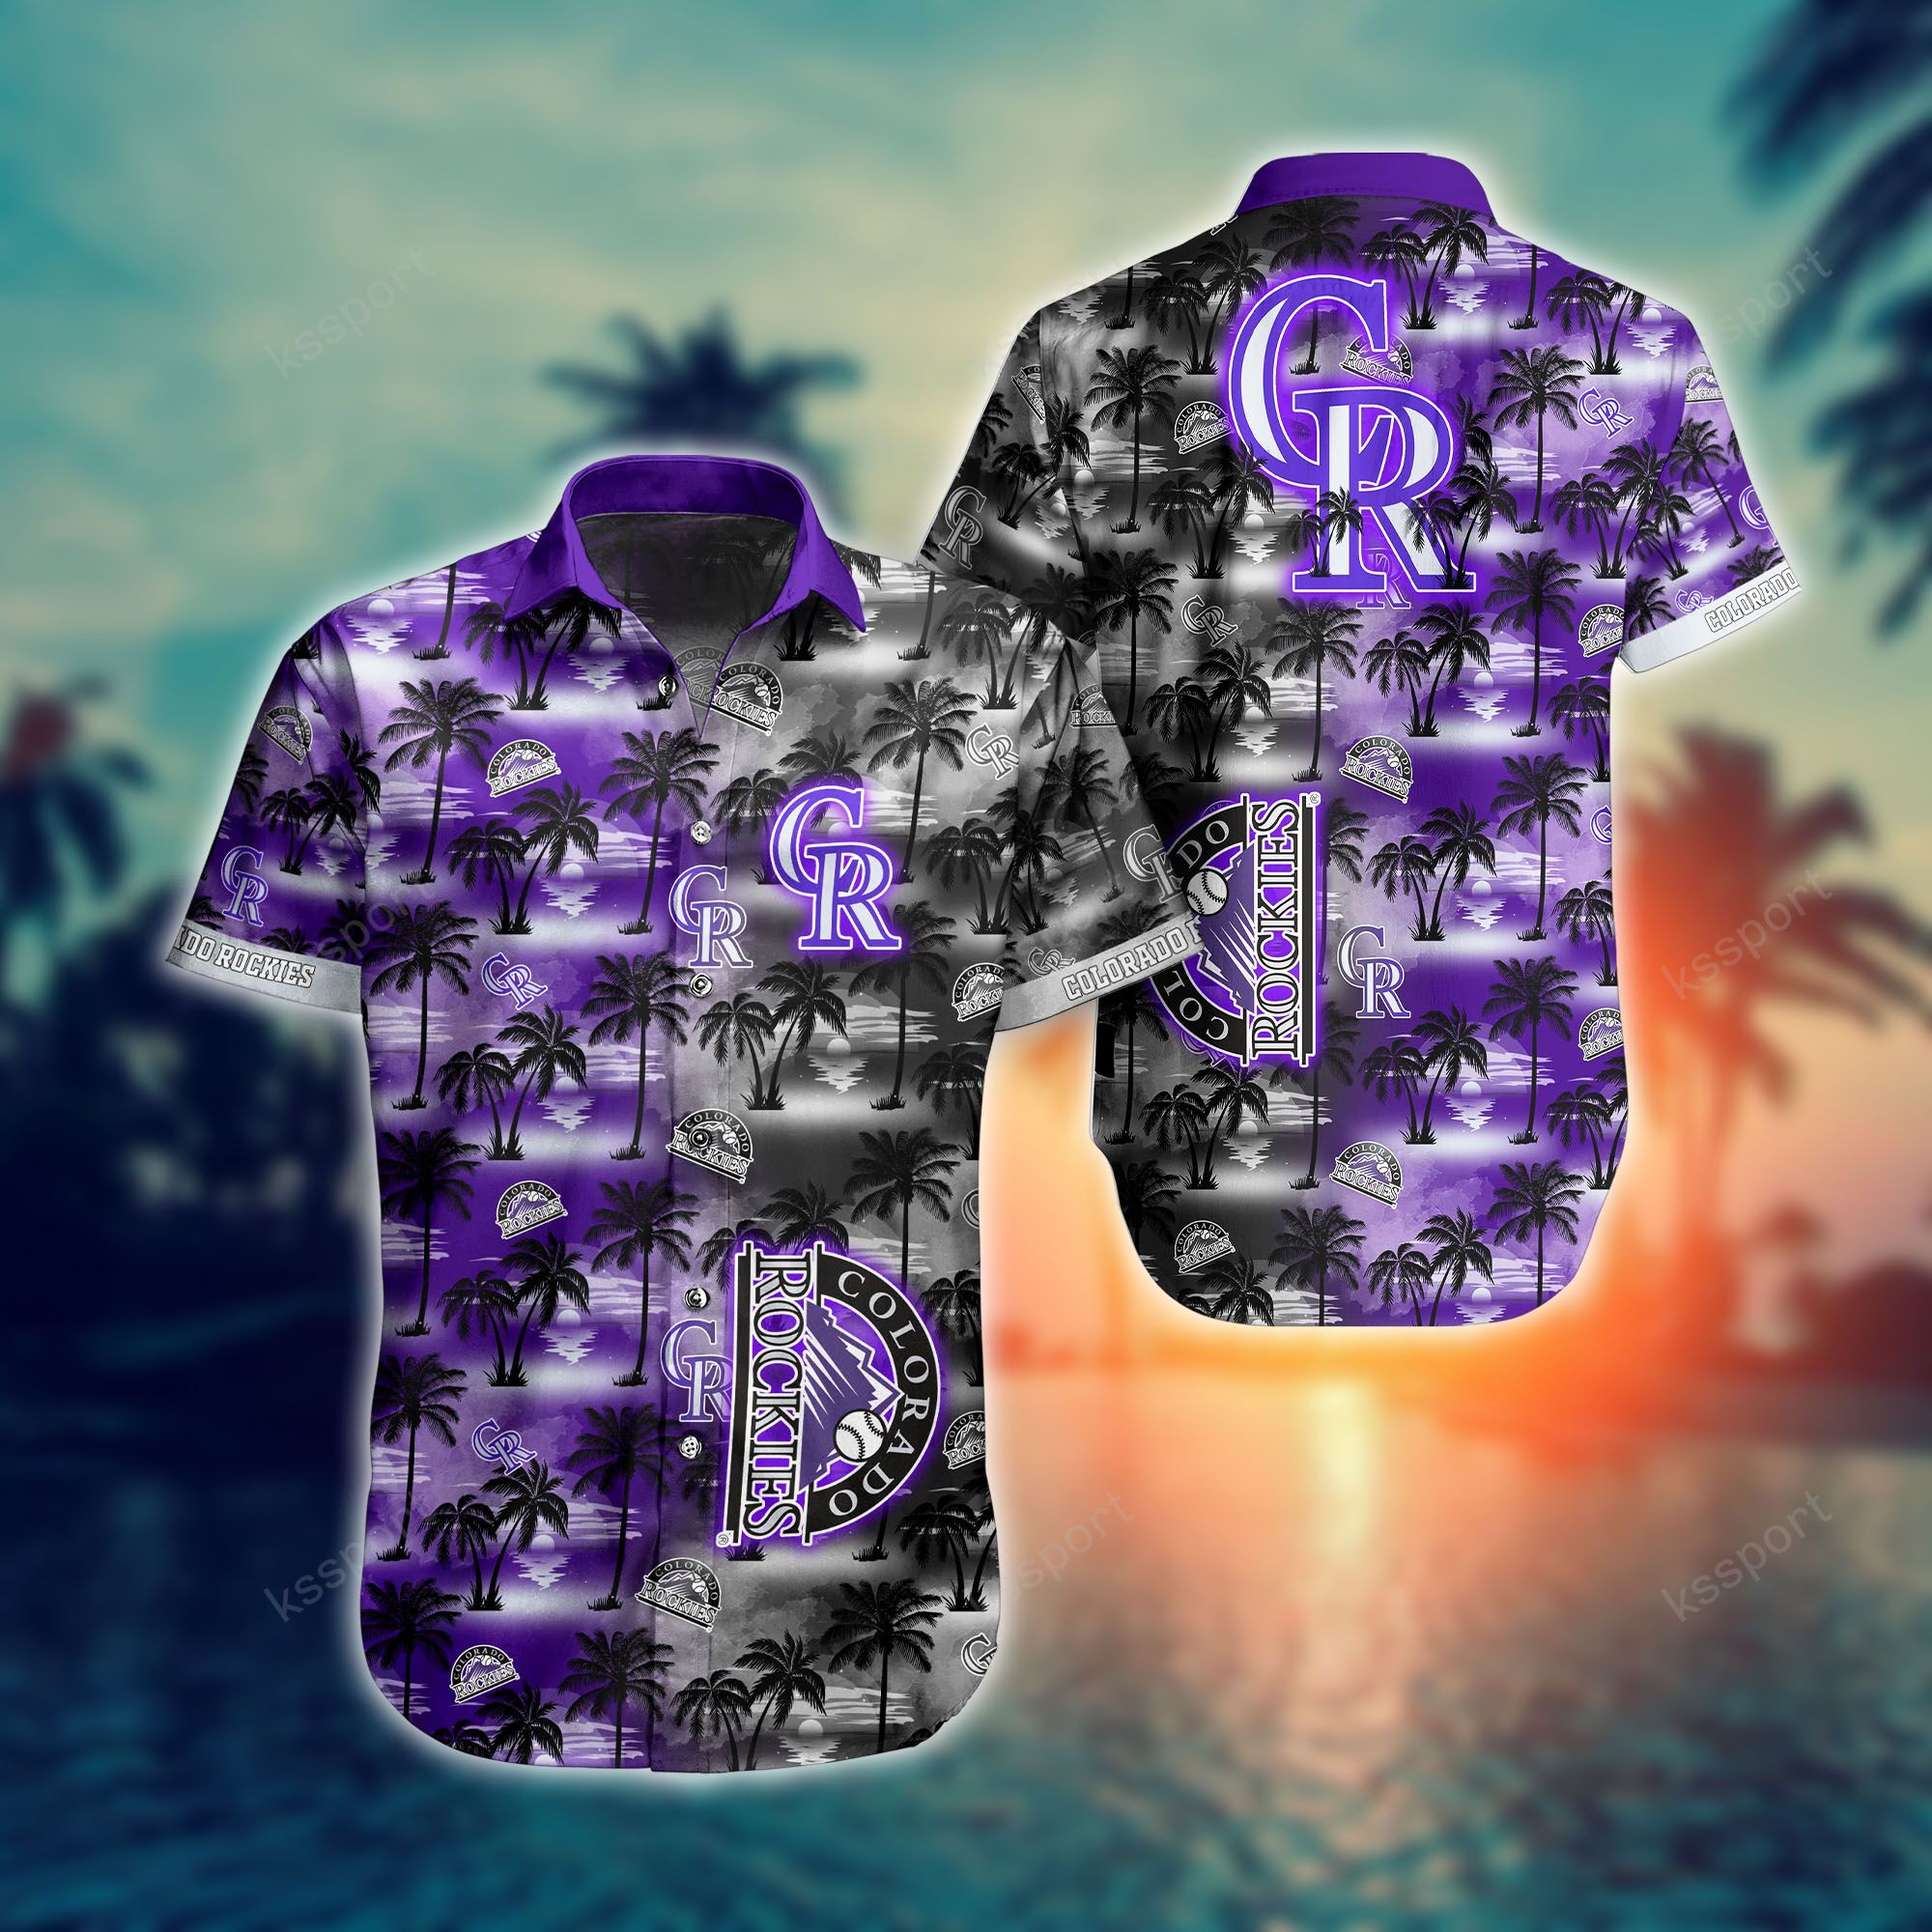 Treat yourself to a cool Hawaiian set today! 111